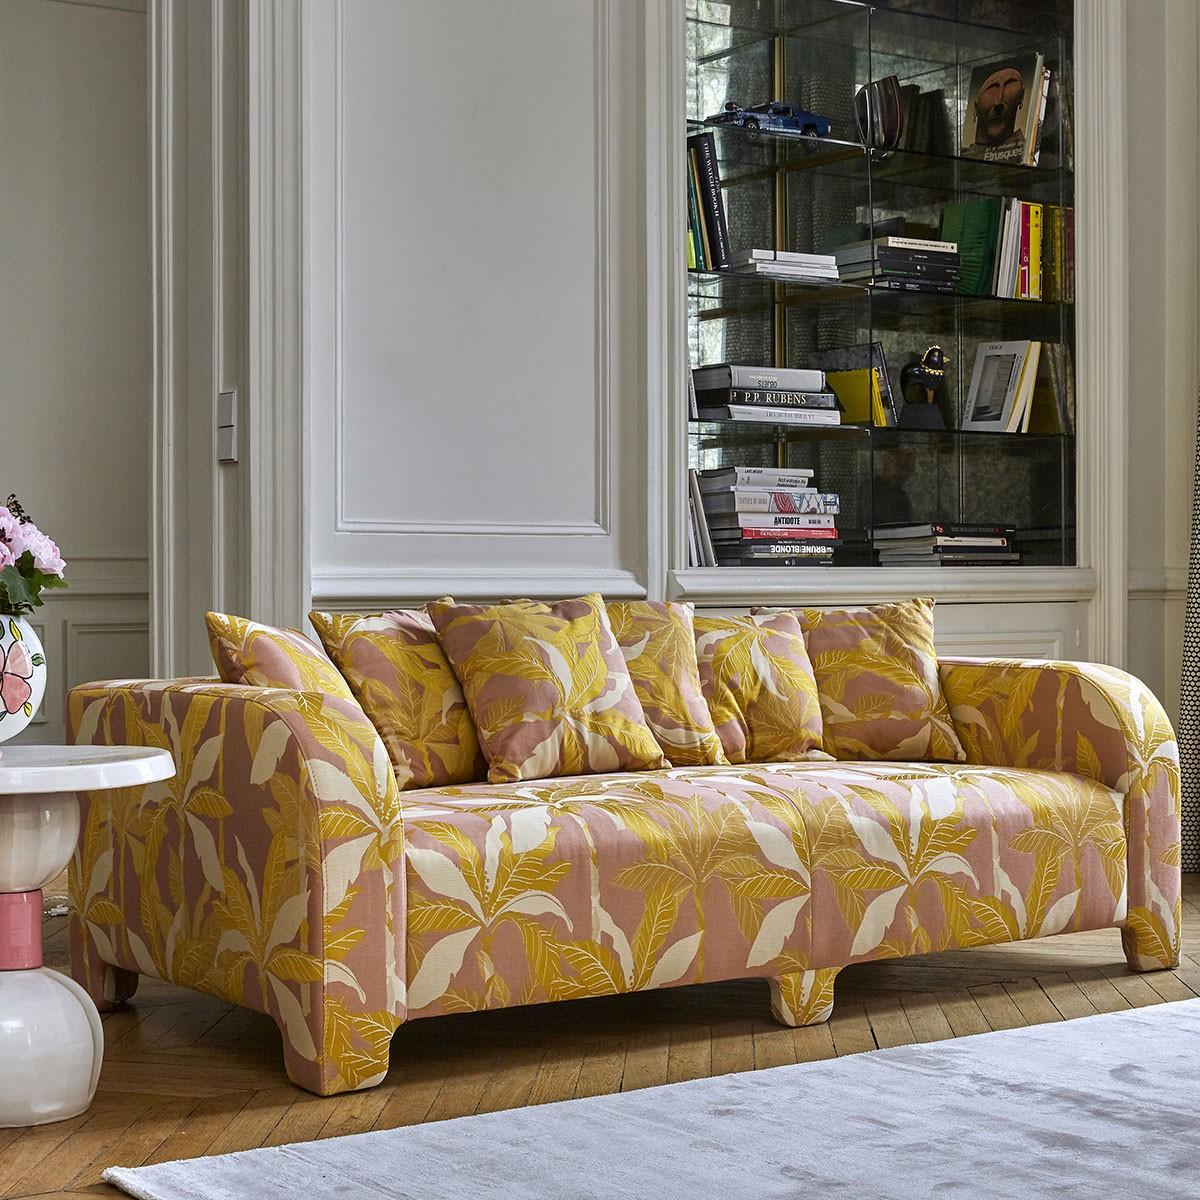 Popus editions Graziella 2 seater sofa in yellow como velvet upholstery.

A foot that hides another. A cushion that hides another. A curve that hides another with contemporary lines and a base like a punctuation mark, this sofa gives pride of